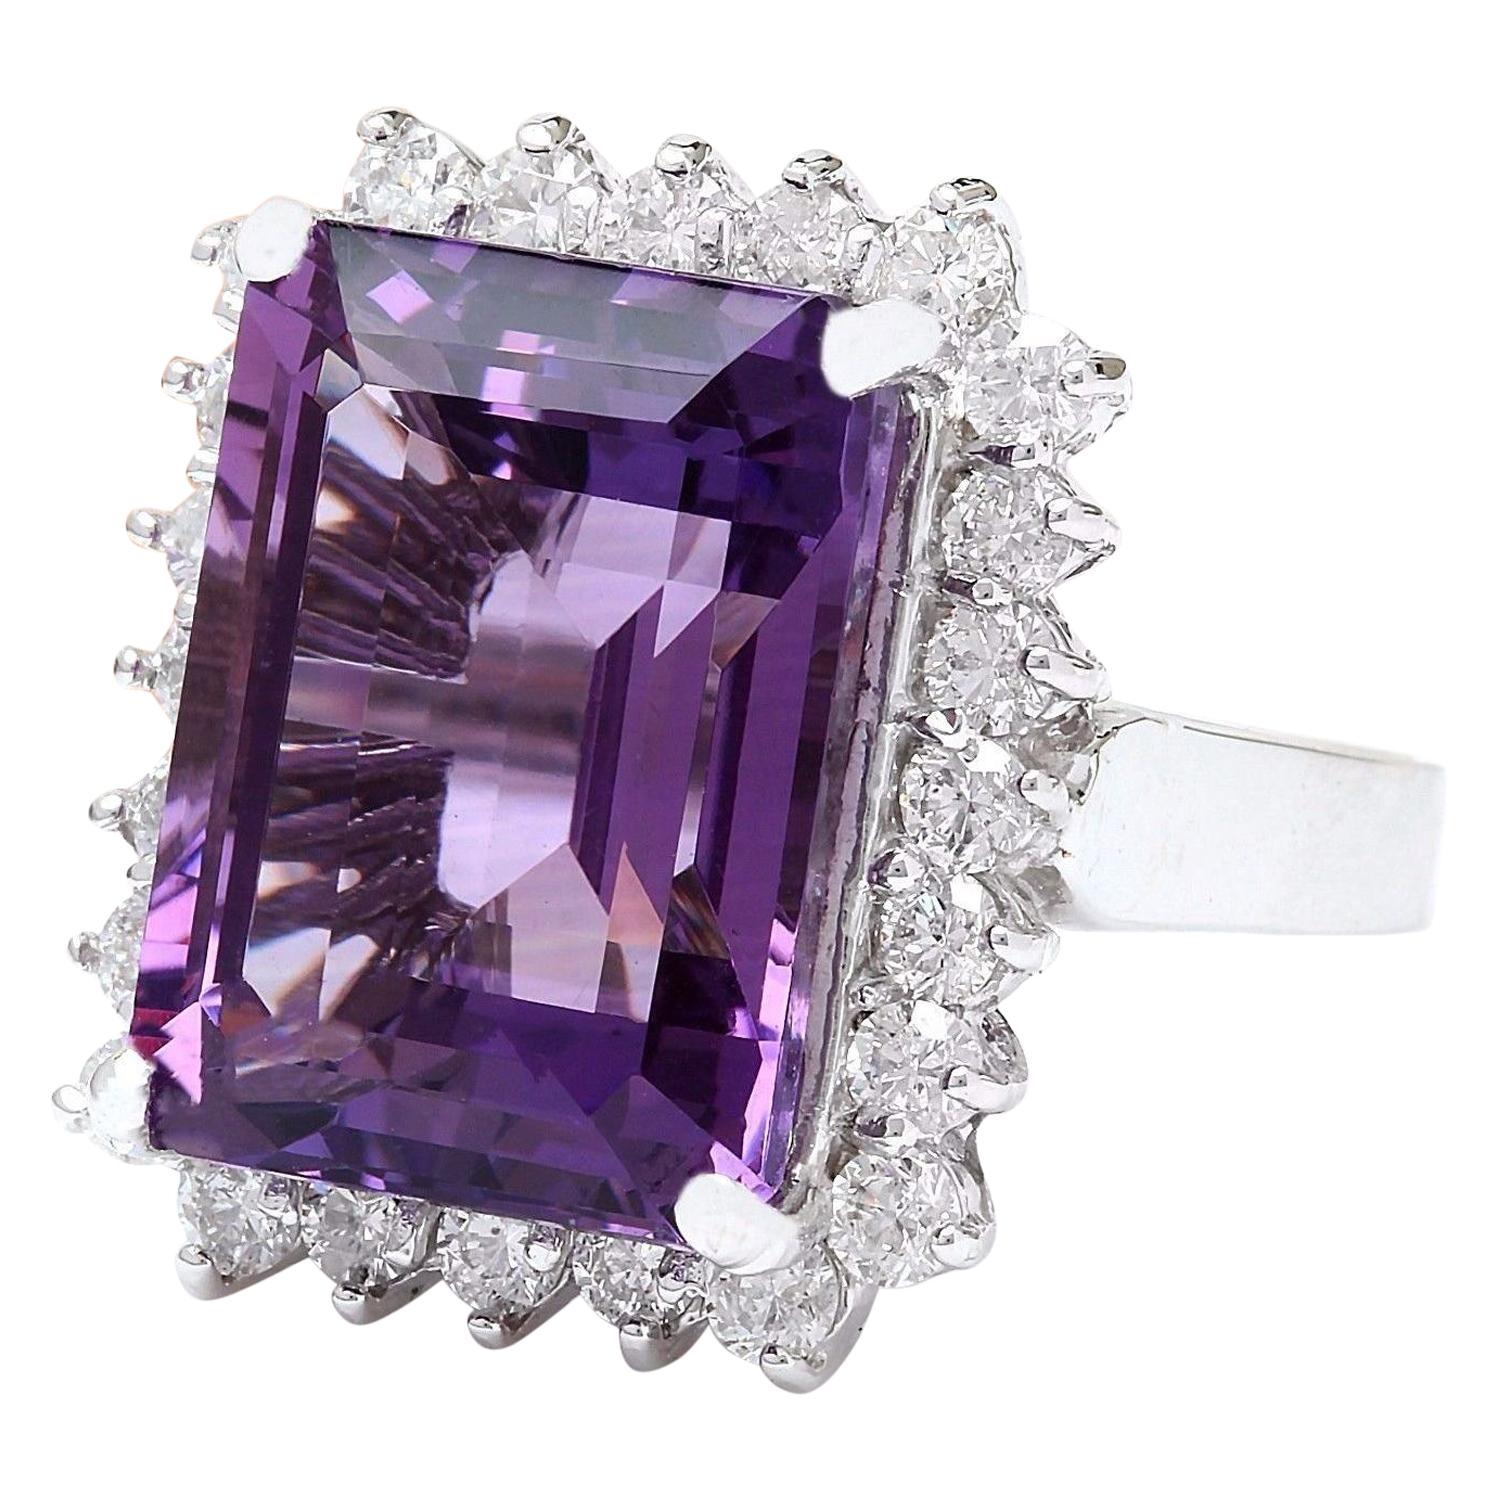 Presenting our exquisite 9.20 Carat Natural Amethyst 14K Solid White Gold Diamond Ring:
Crafted from luxurious 14K White Gold, this stunning ring features a captivating 8.00 Carat Amethyst stone, cut in an elegant emerald shape and measuring